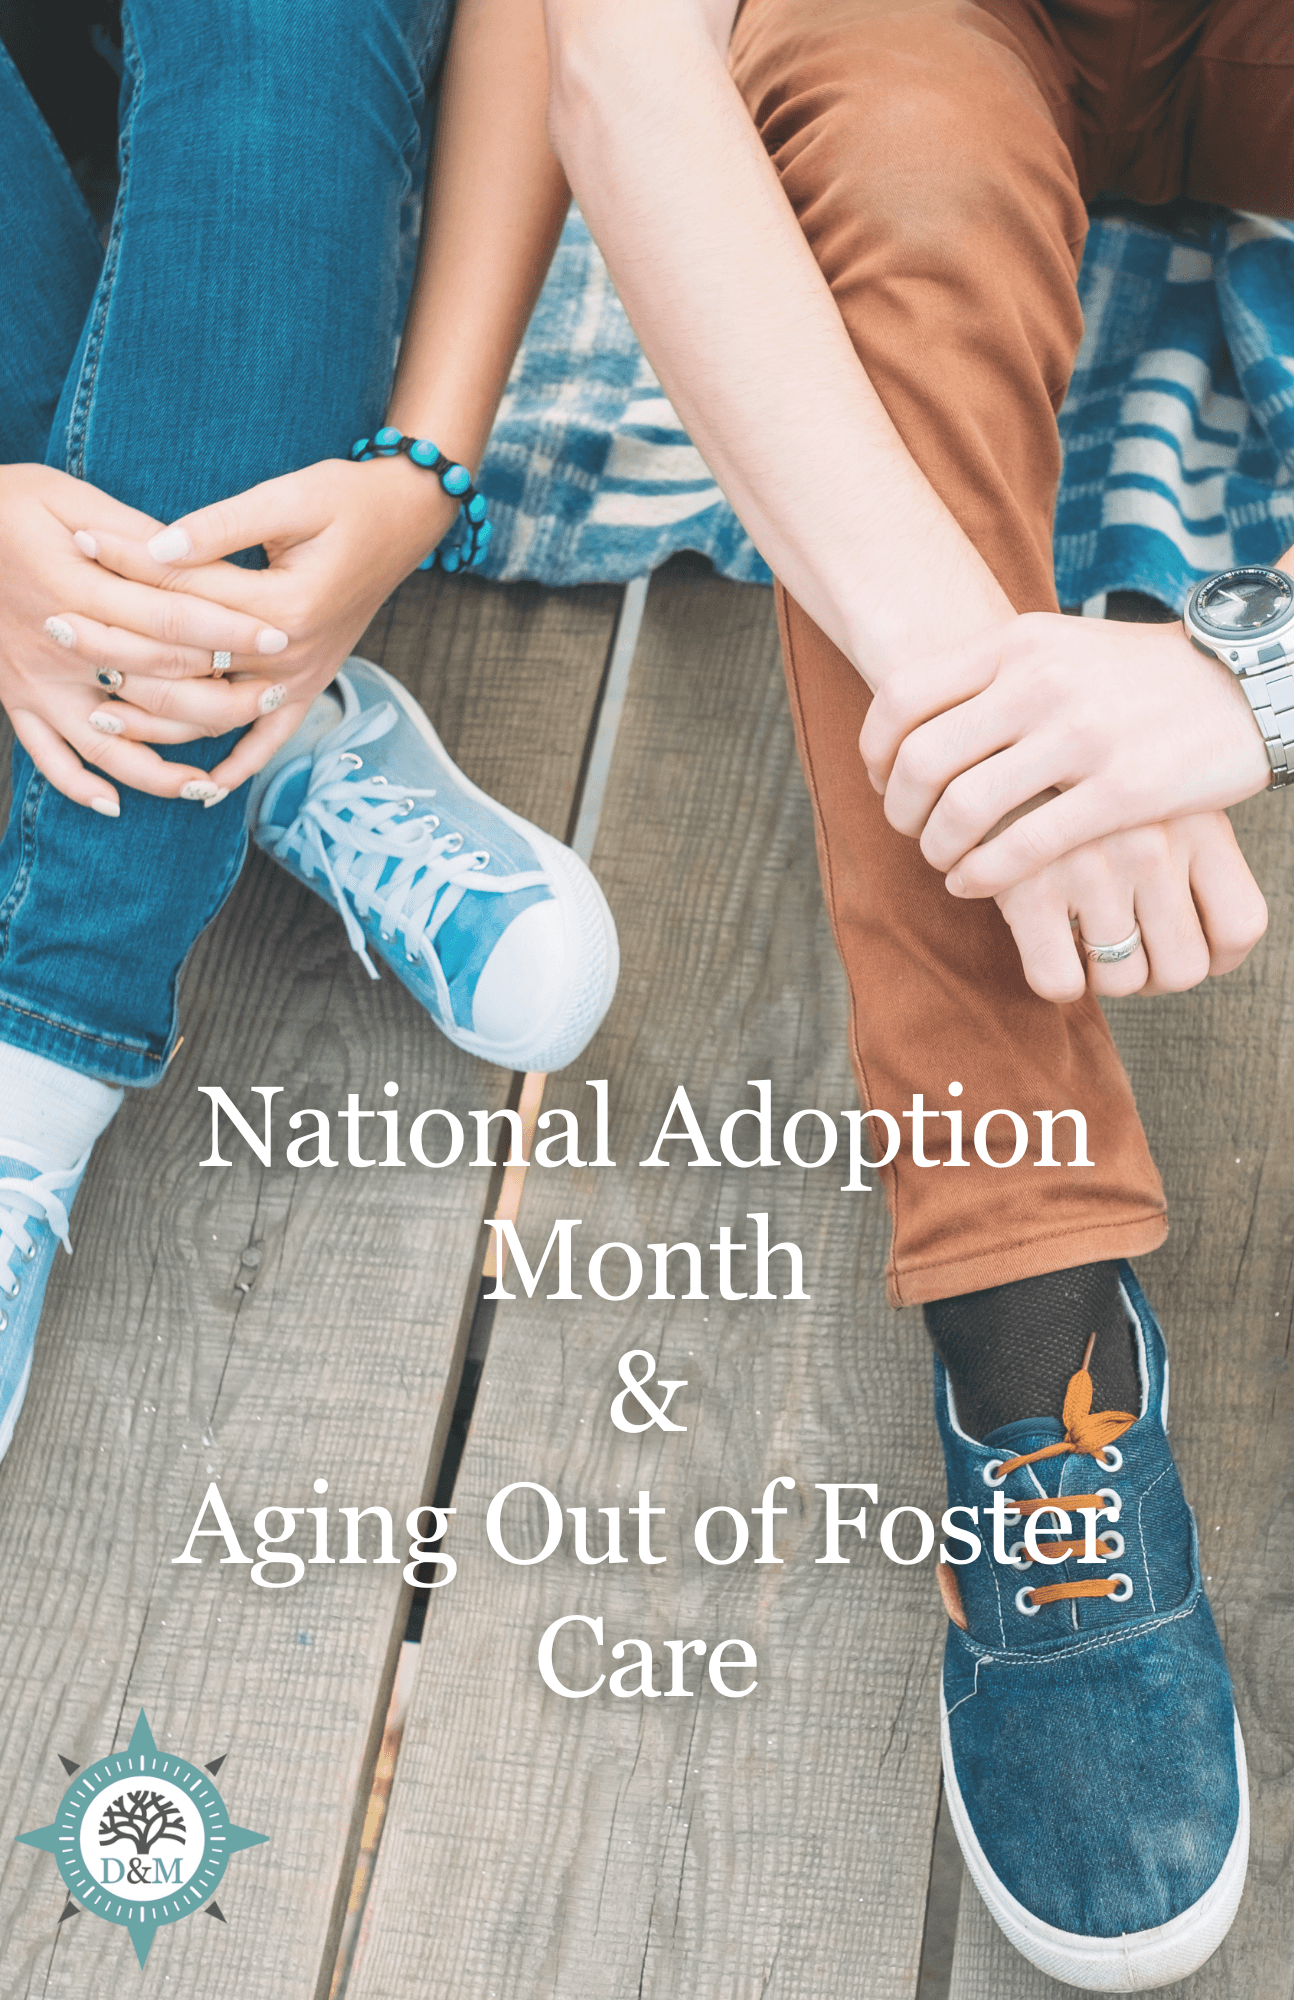 National Adoption Month & Aging Out of Foster Care